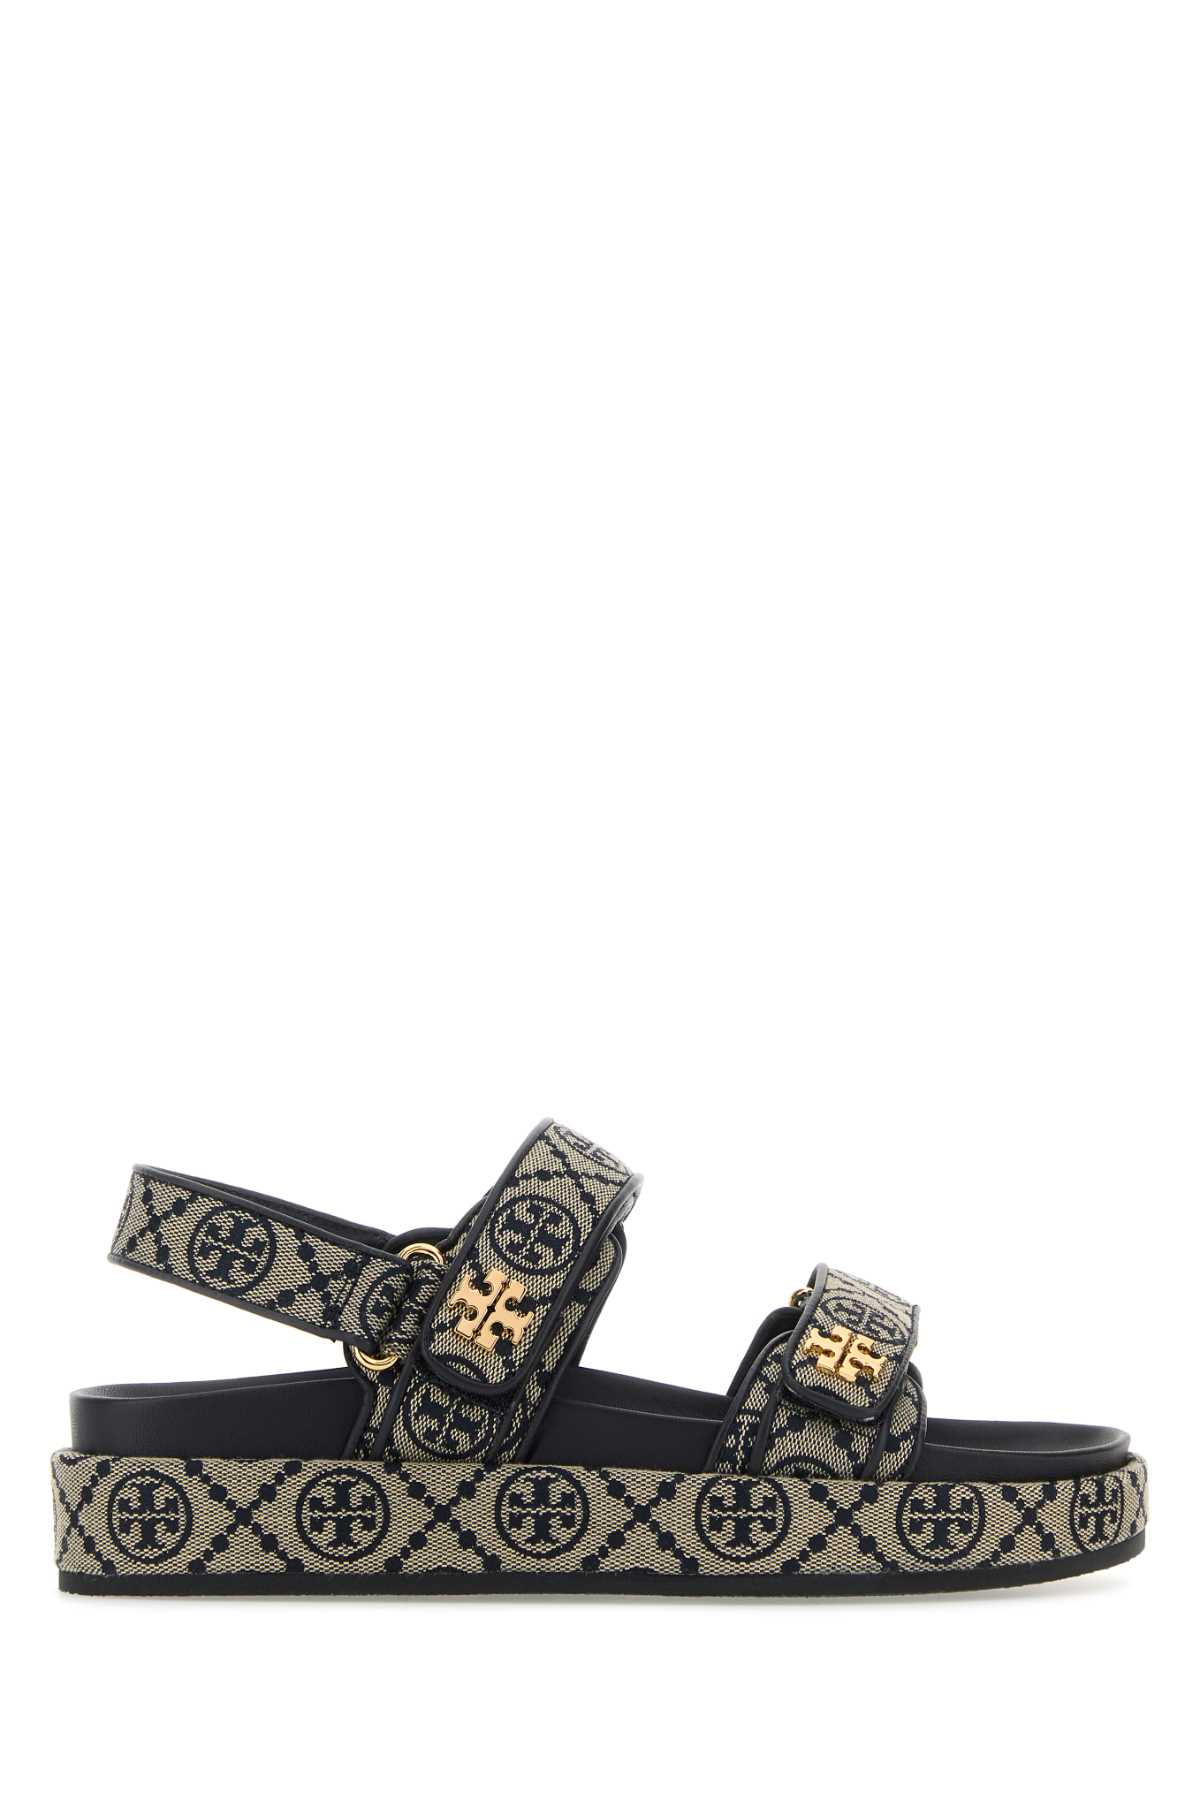 Tory Burch Embroidered Fabric Kira Sandals In Navy